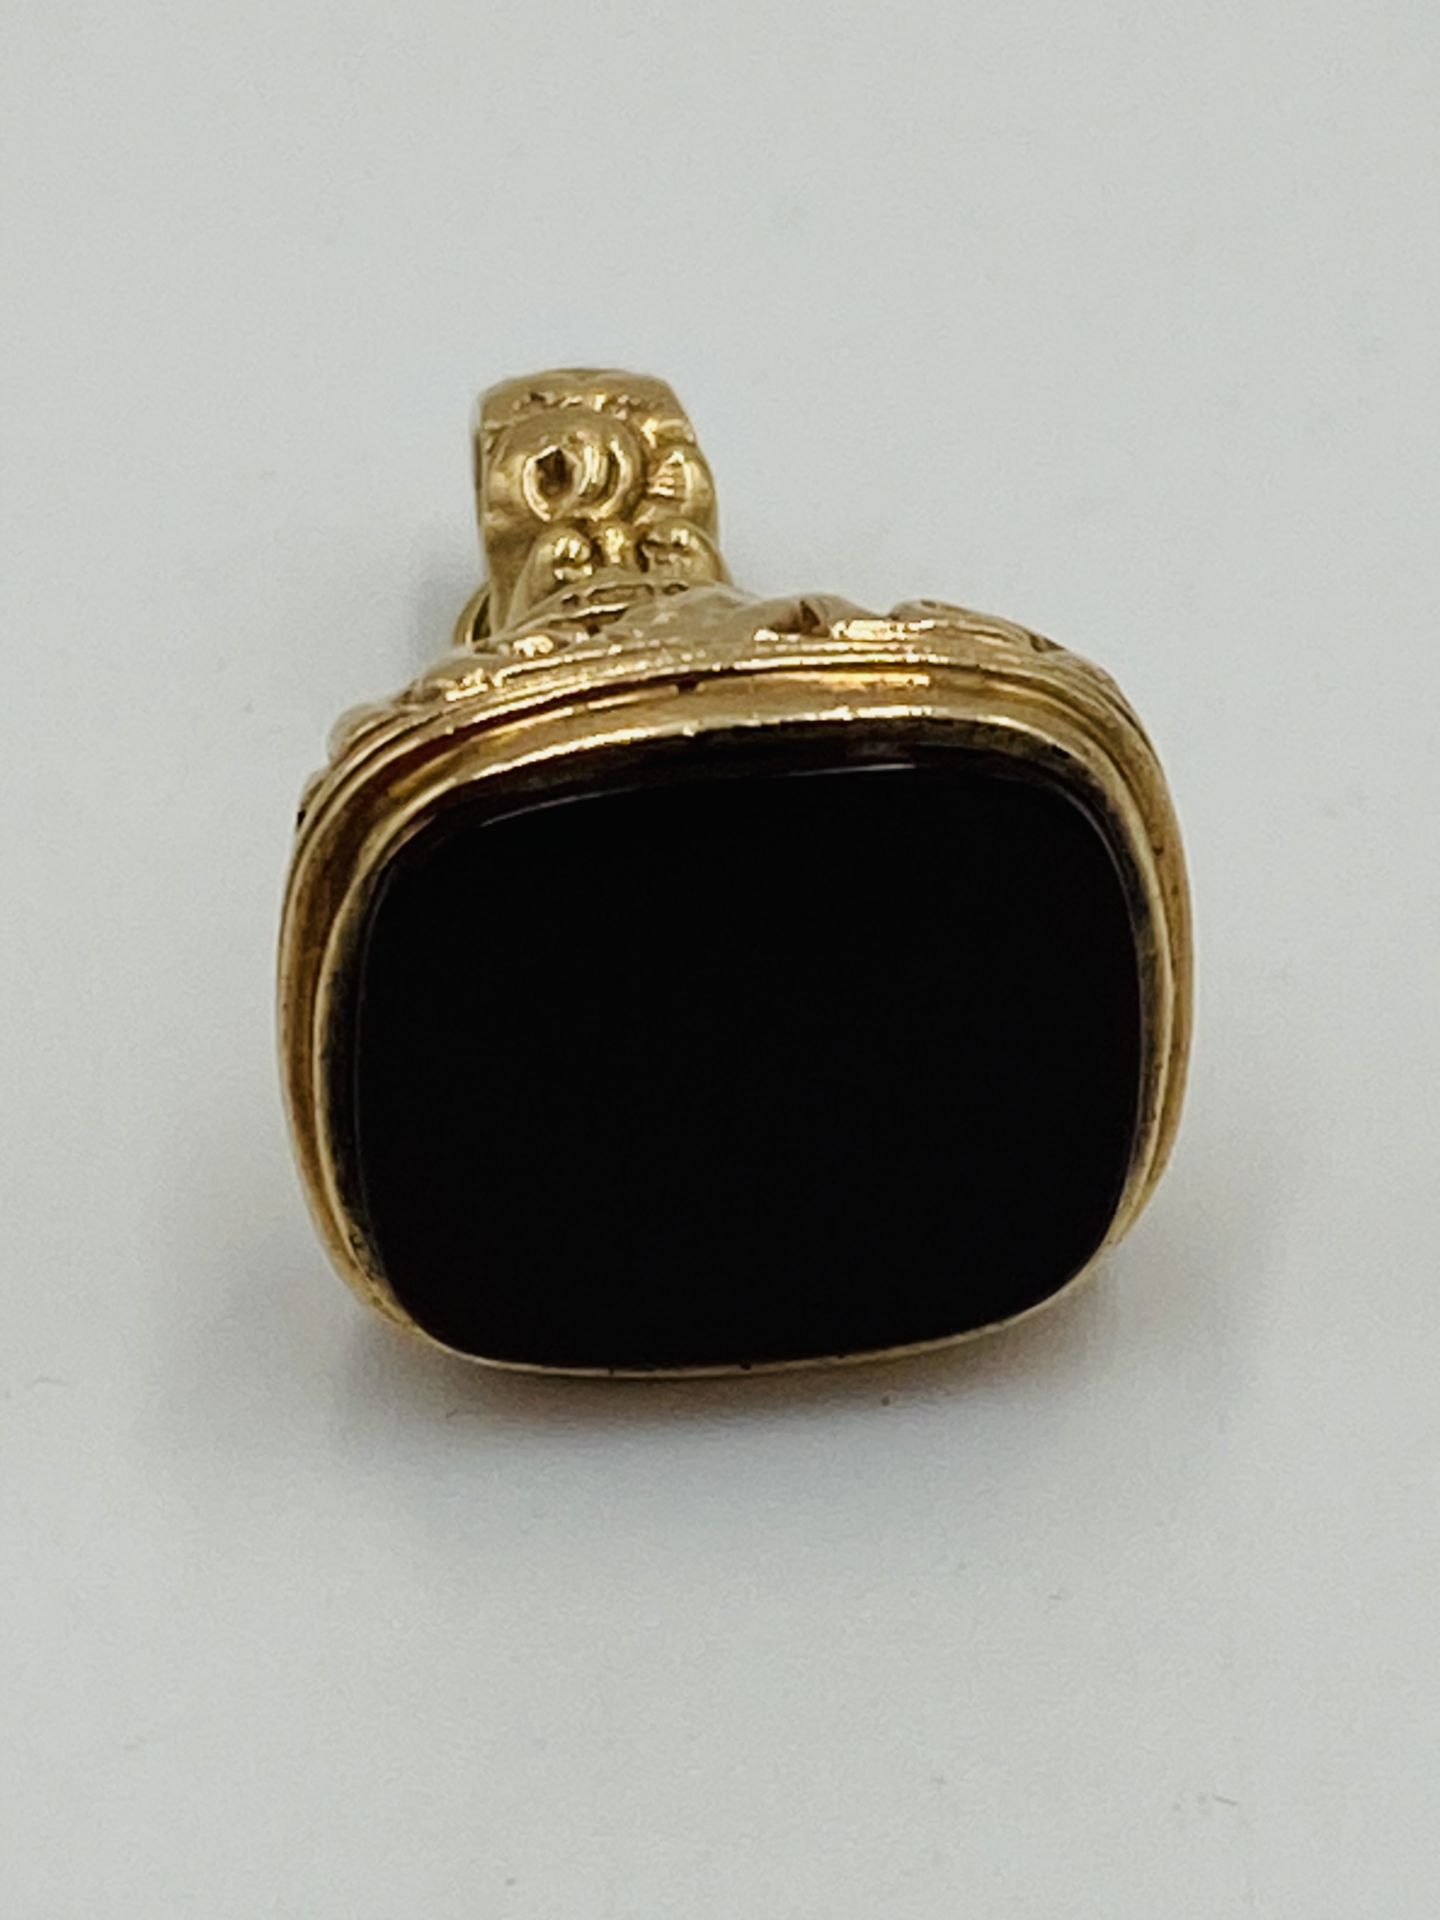 9ct gold fob seal - Image 5 of 5